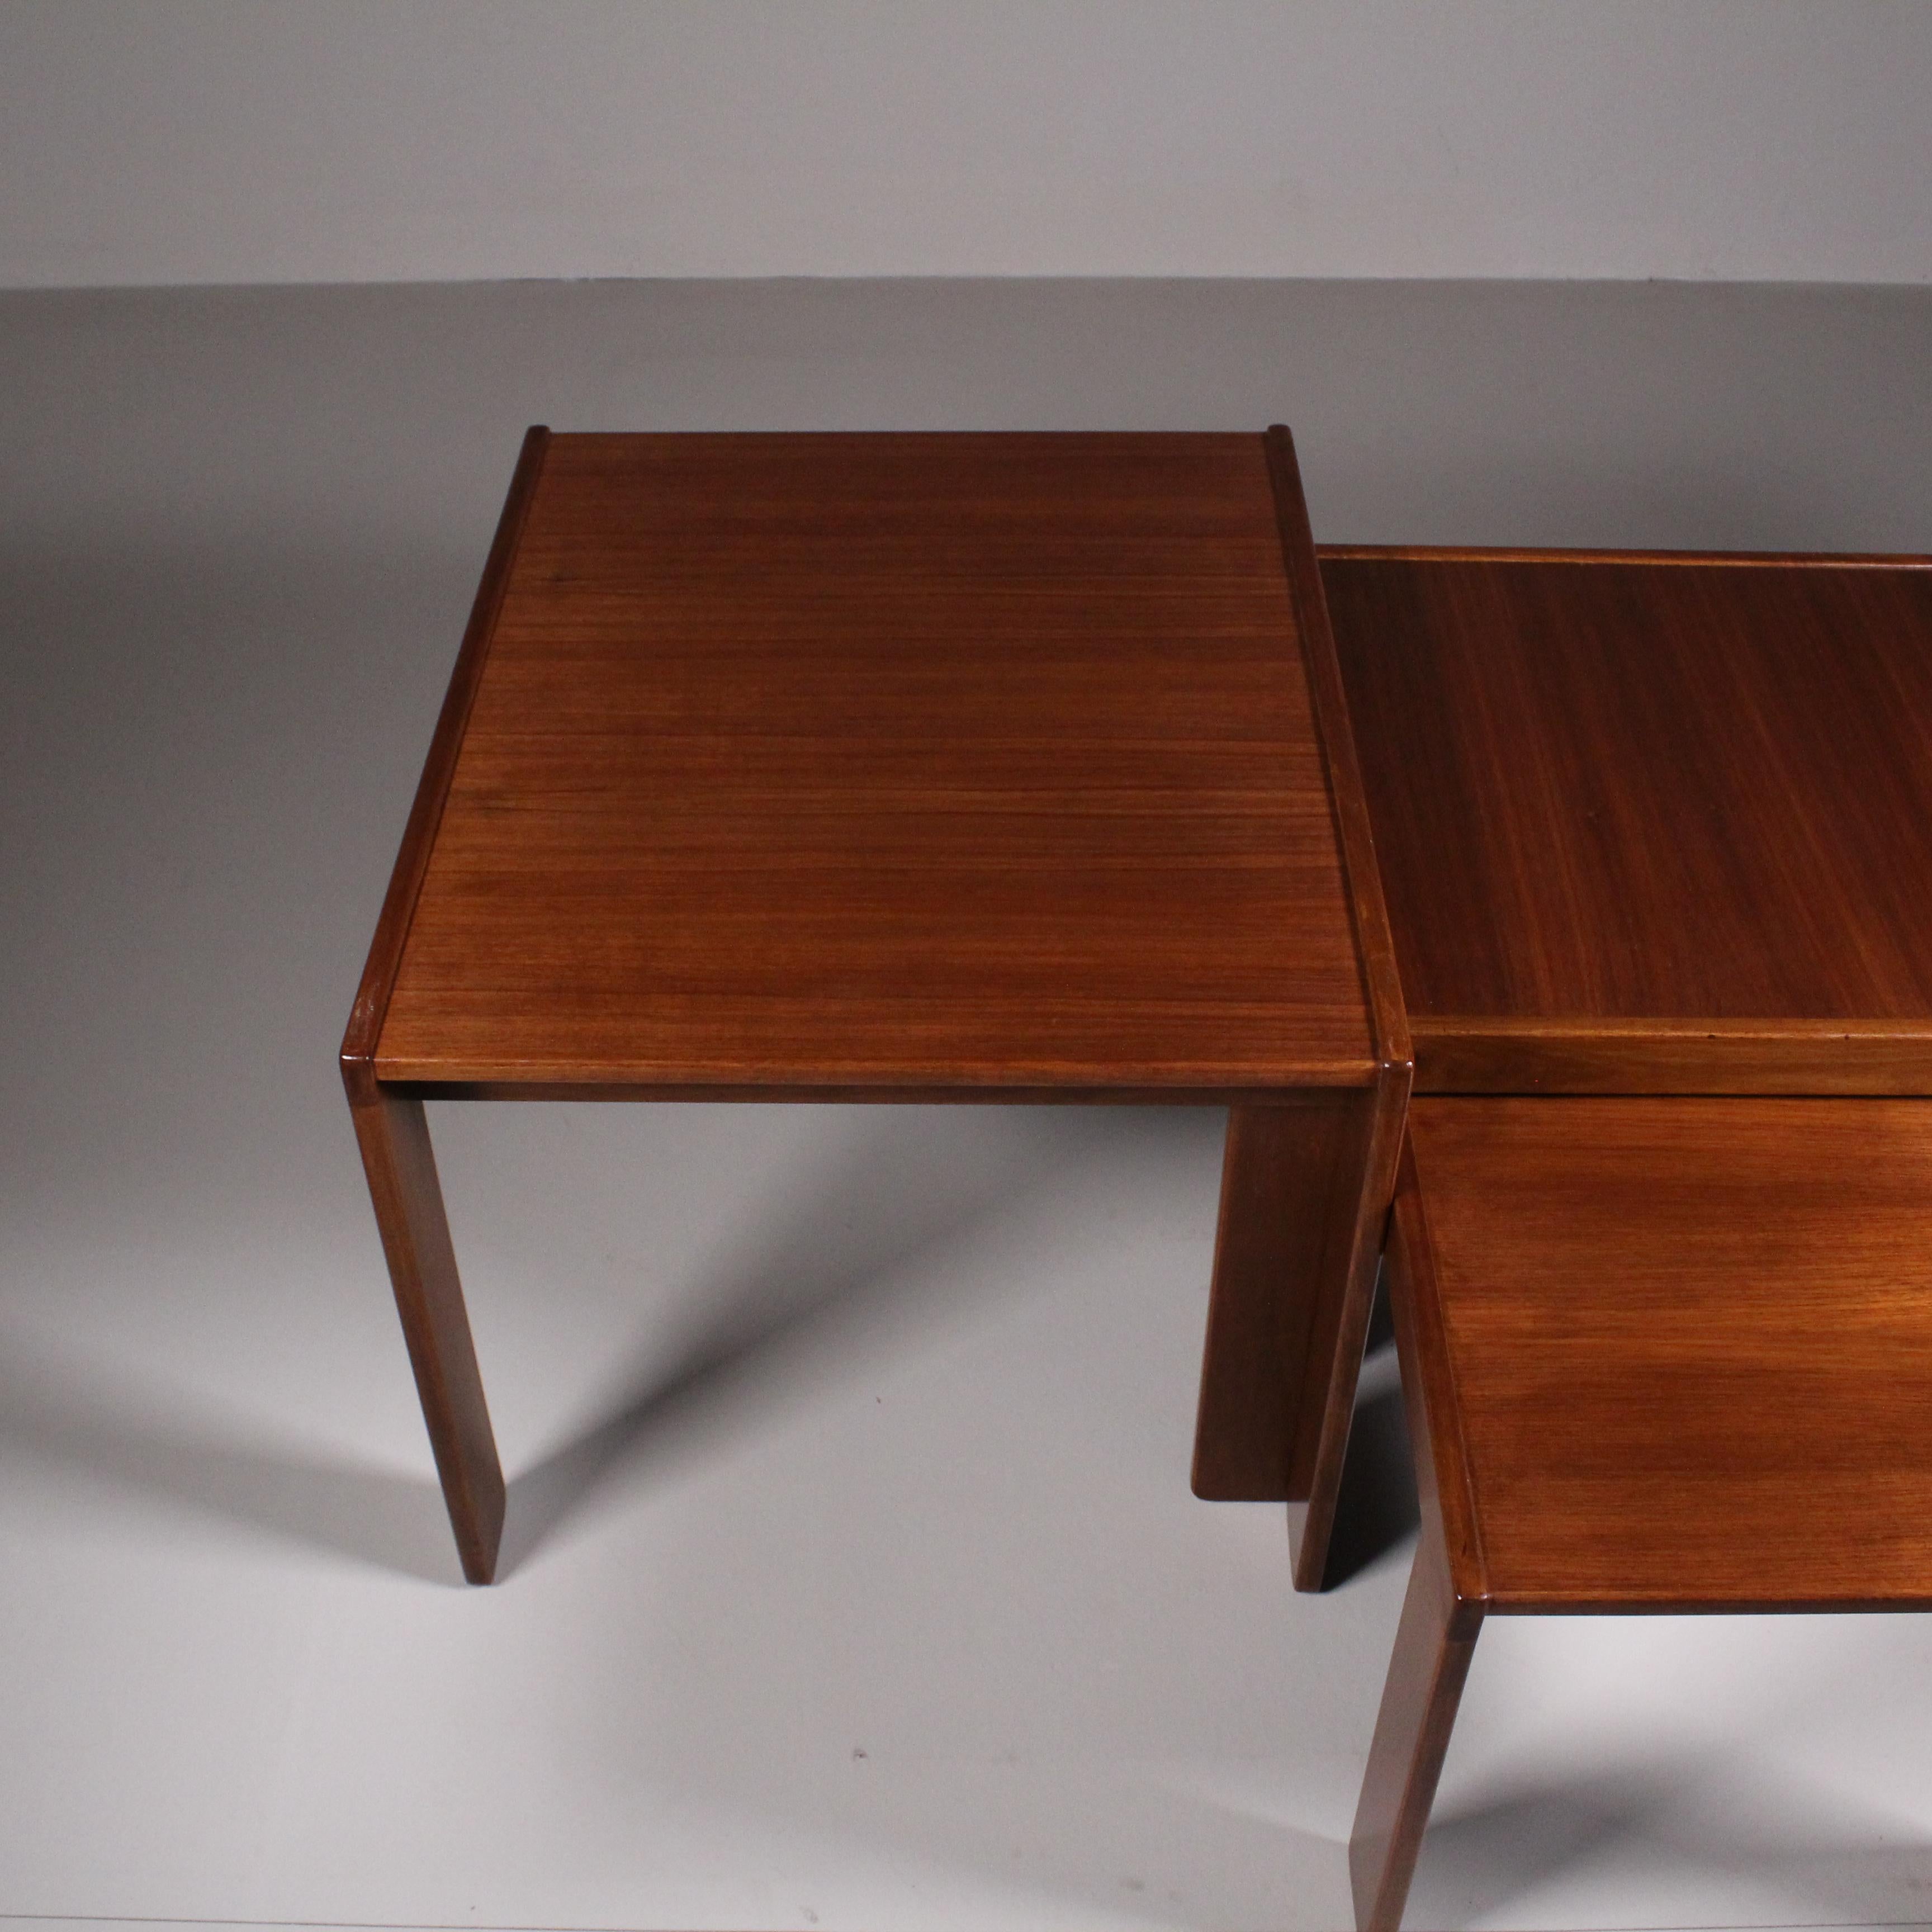 Modern Small tables model 777, Afra and Tobia Scarpa, 1965 Circa For Sale